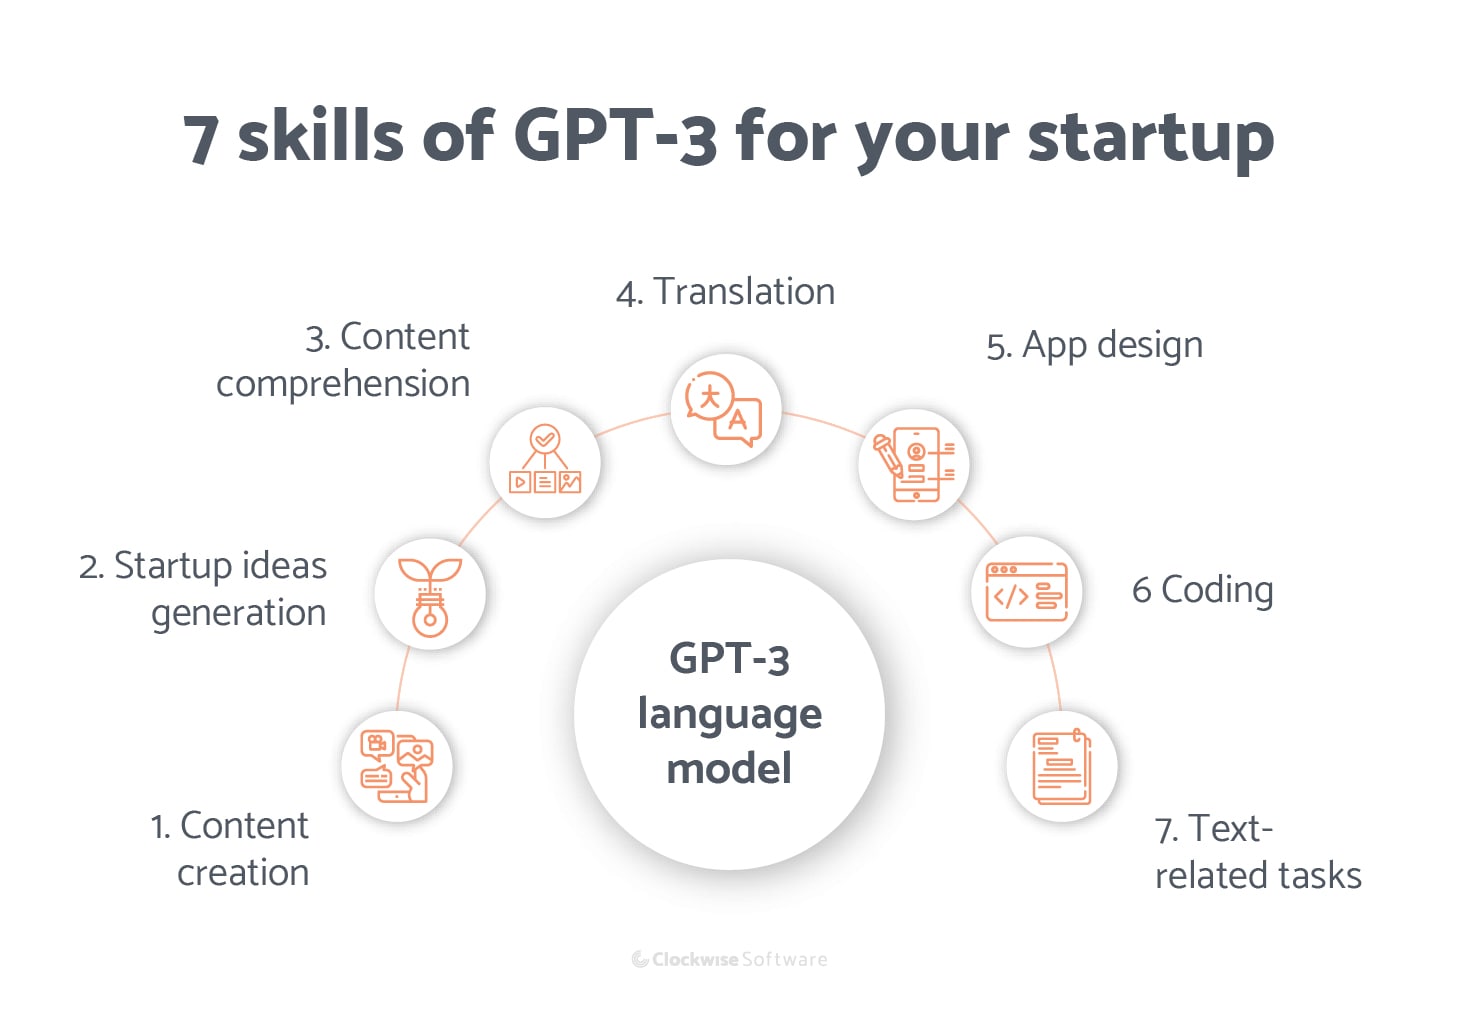 How to Use GPT-3 in Your Product: GPT-3 Integration — Clockwise Software